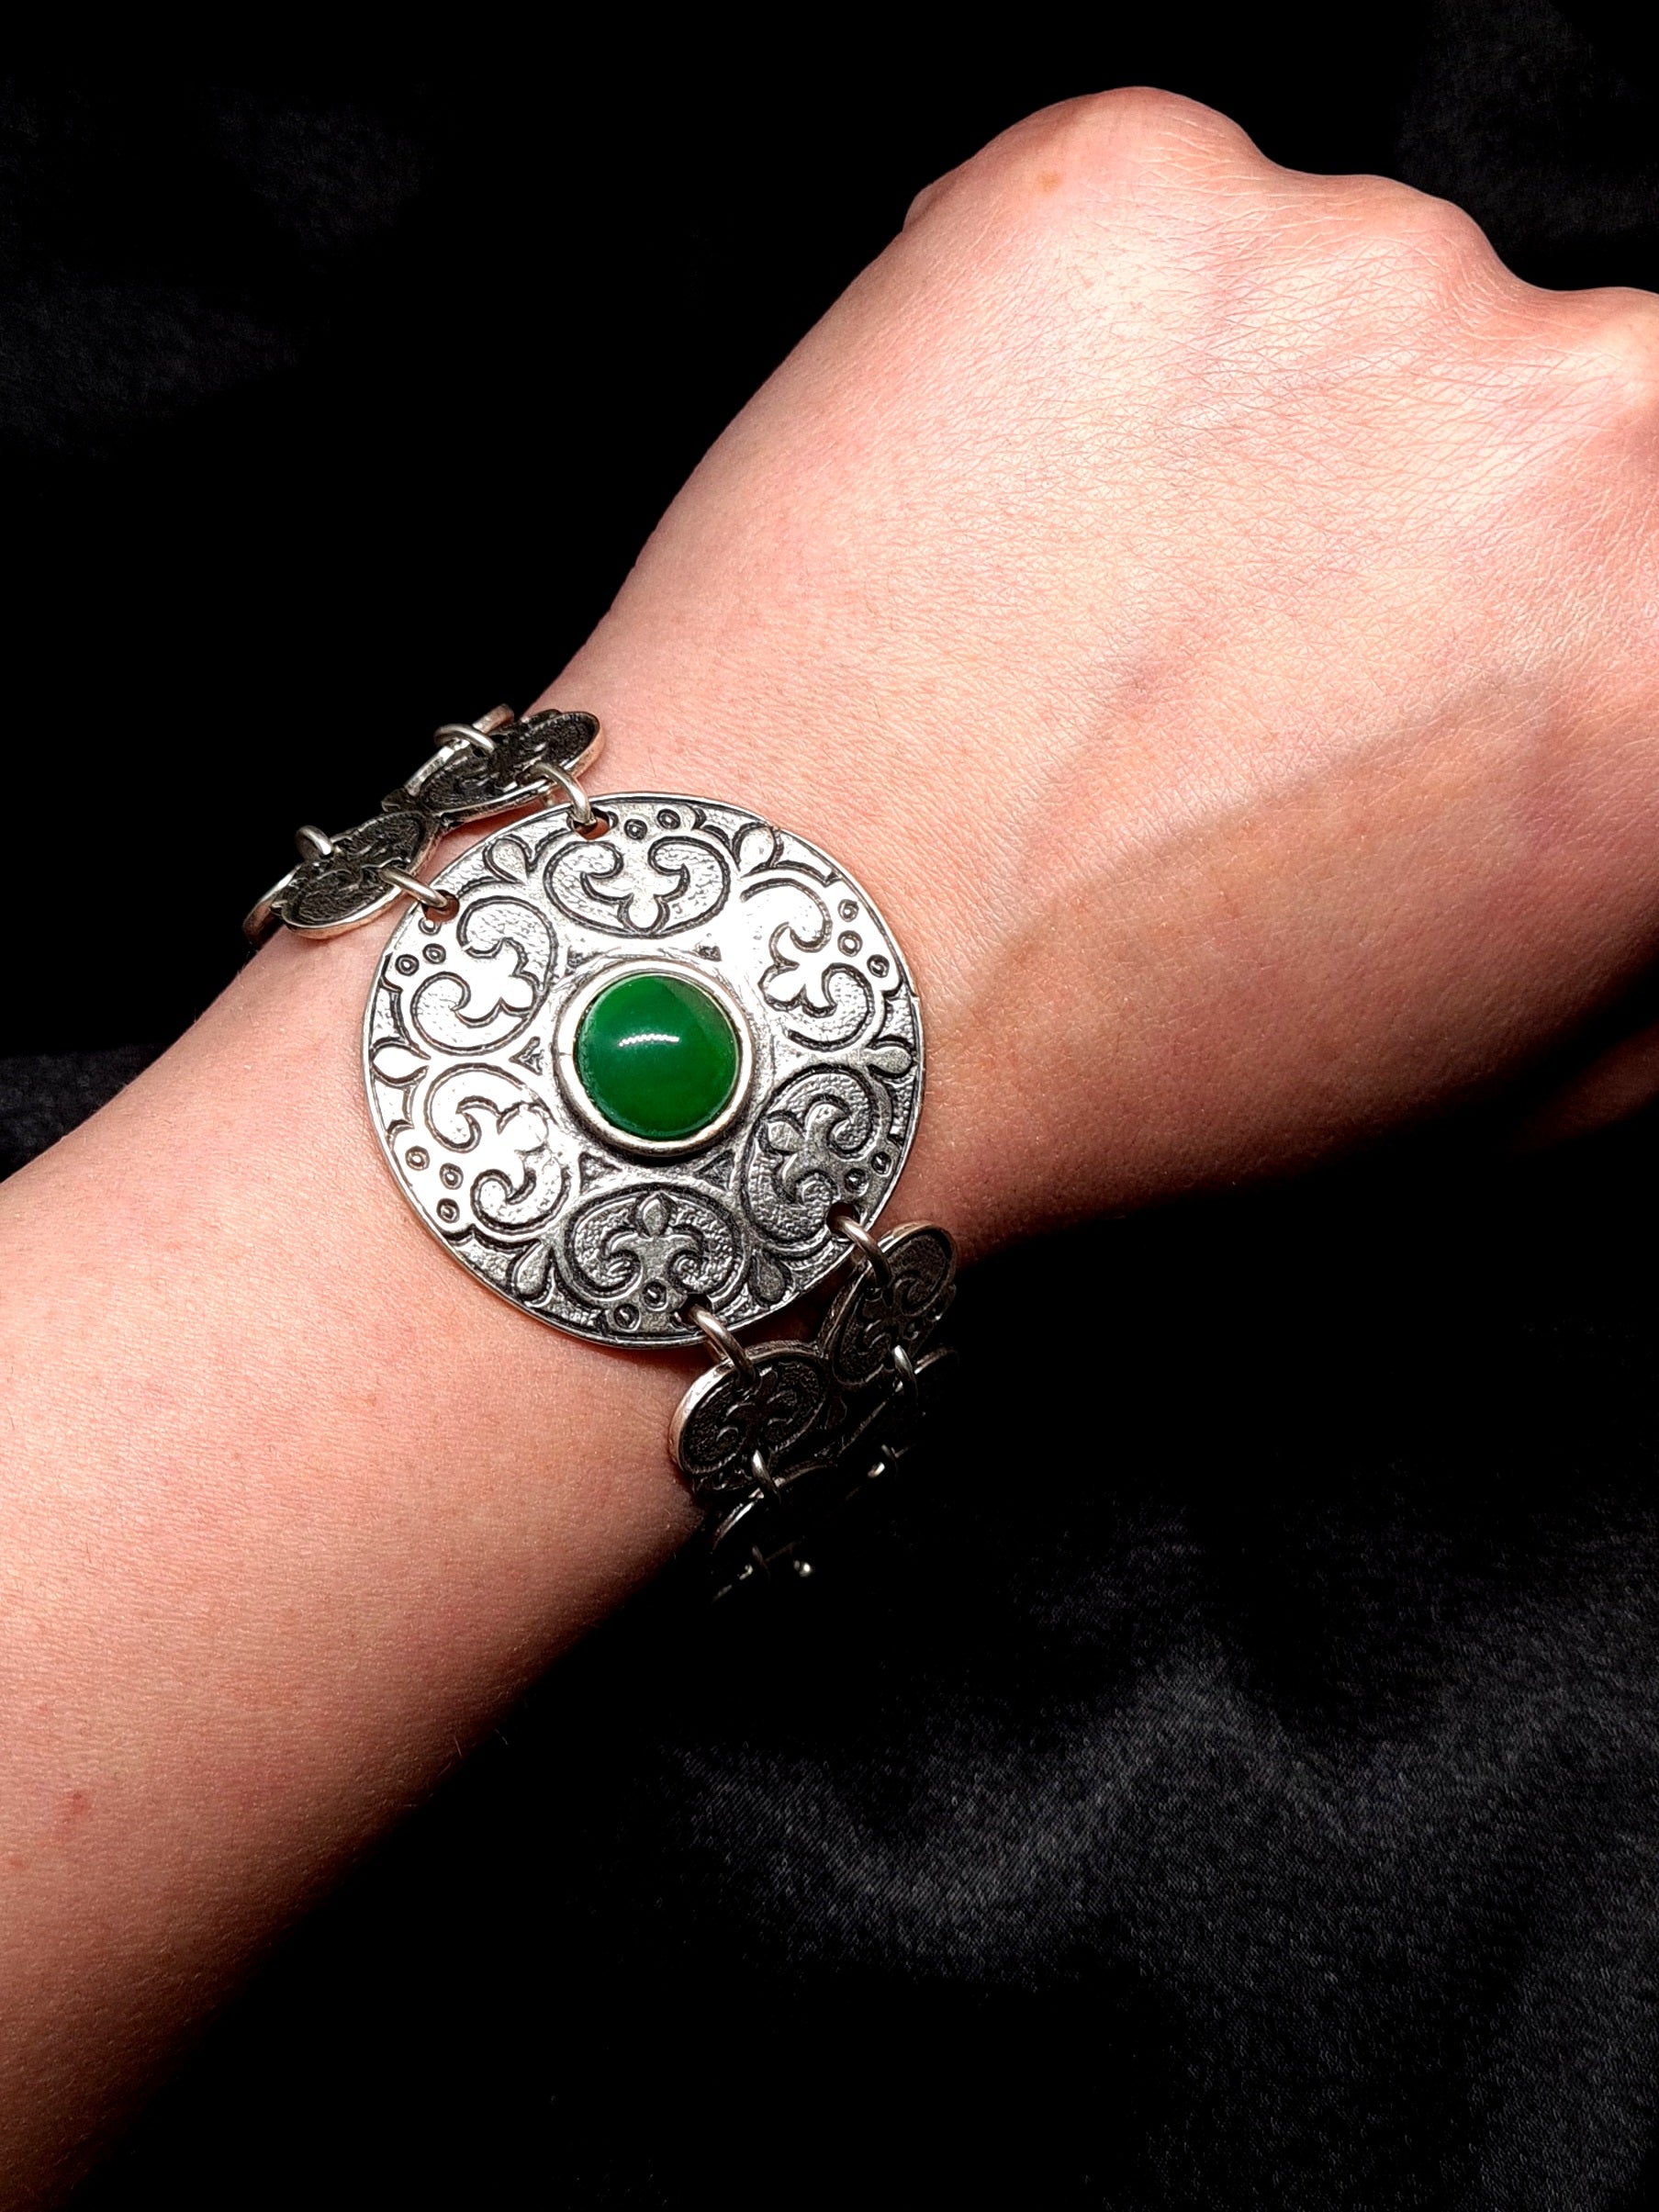  Fay Bracelet a delicate metalwork with a vibrant green stone 